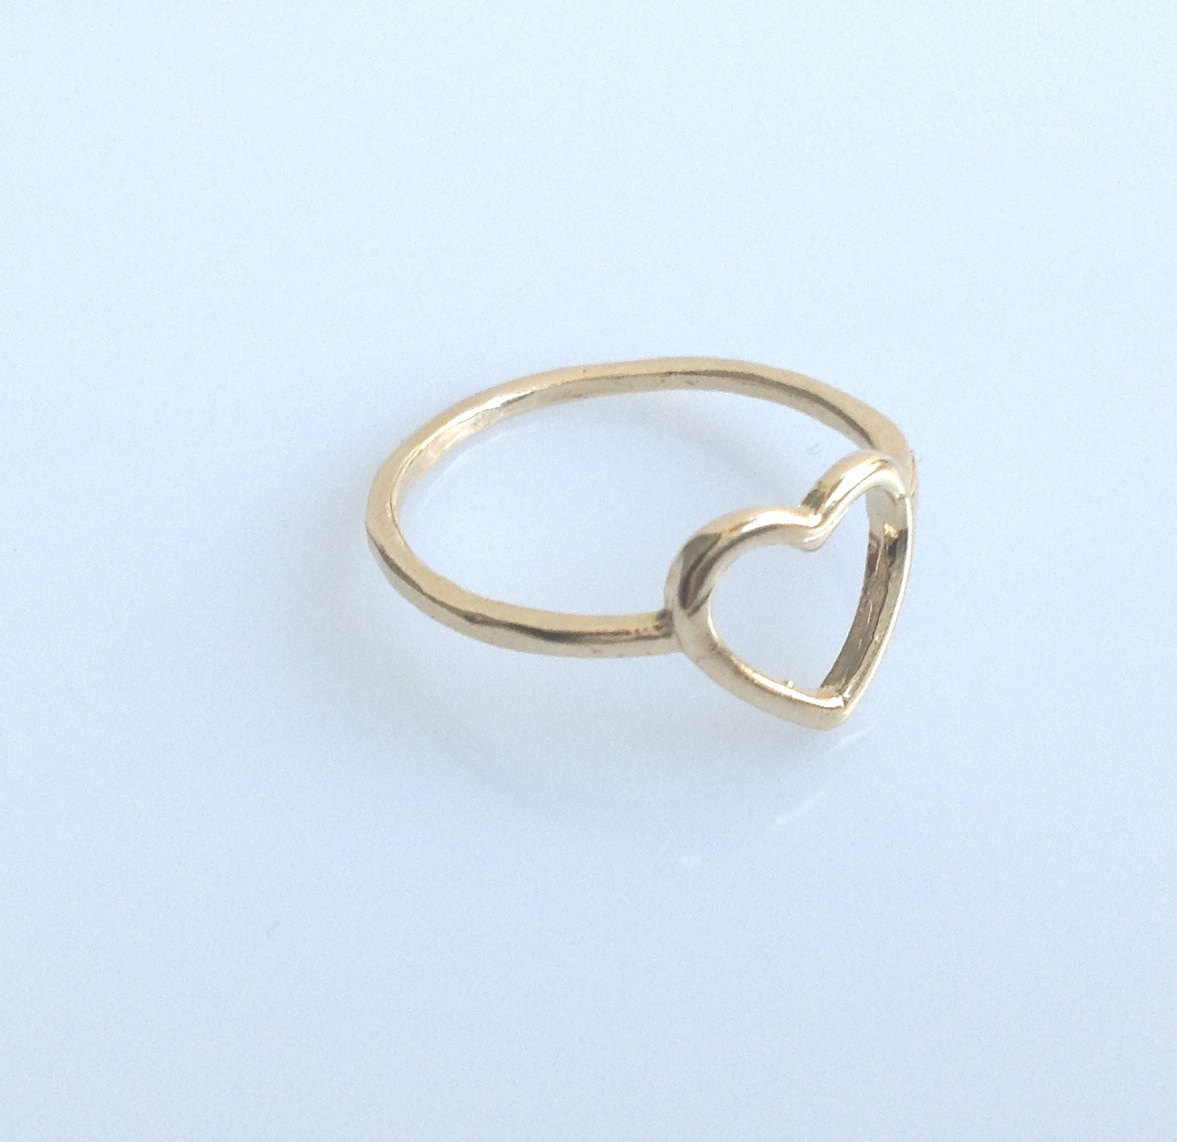 Gold Filled Ring, Heart Ring,knuckle Ring, Gold Ring, Love Ring, Small Gold Ring, Thin Rings, A603